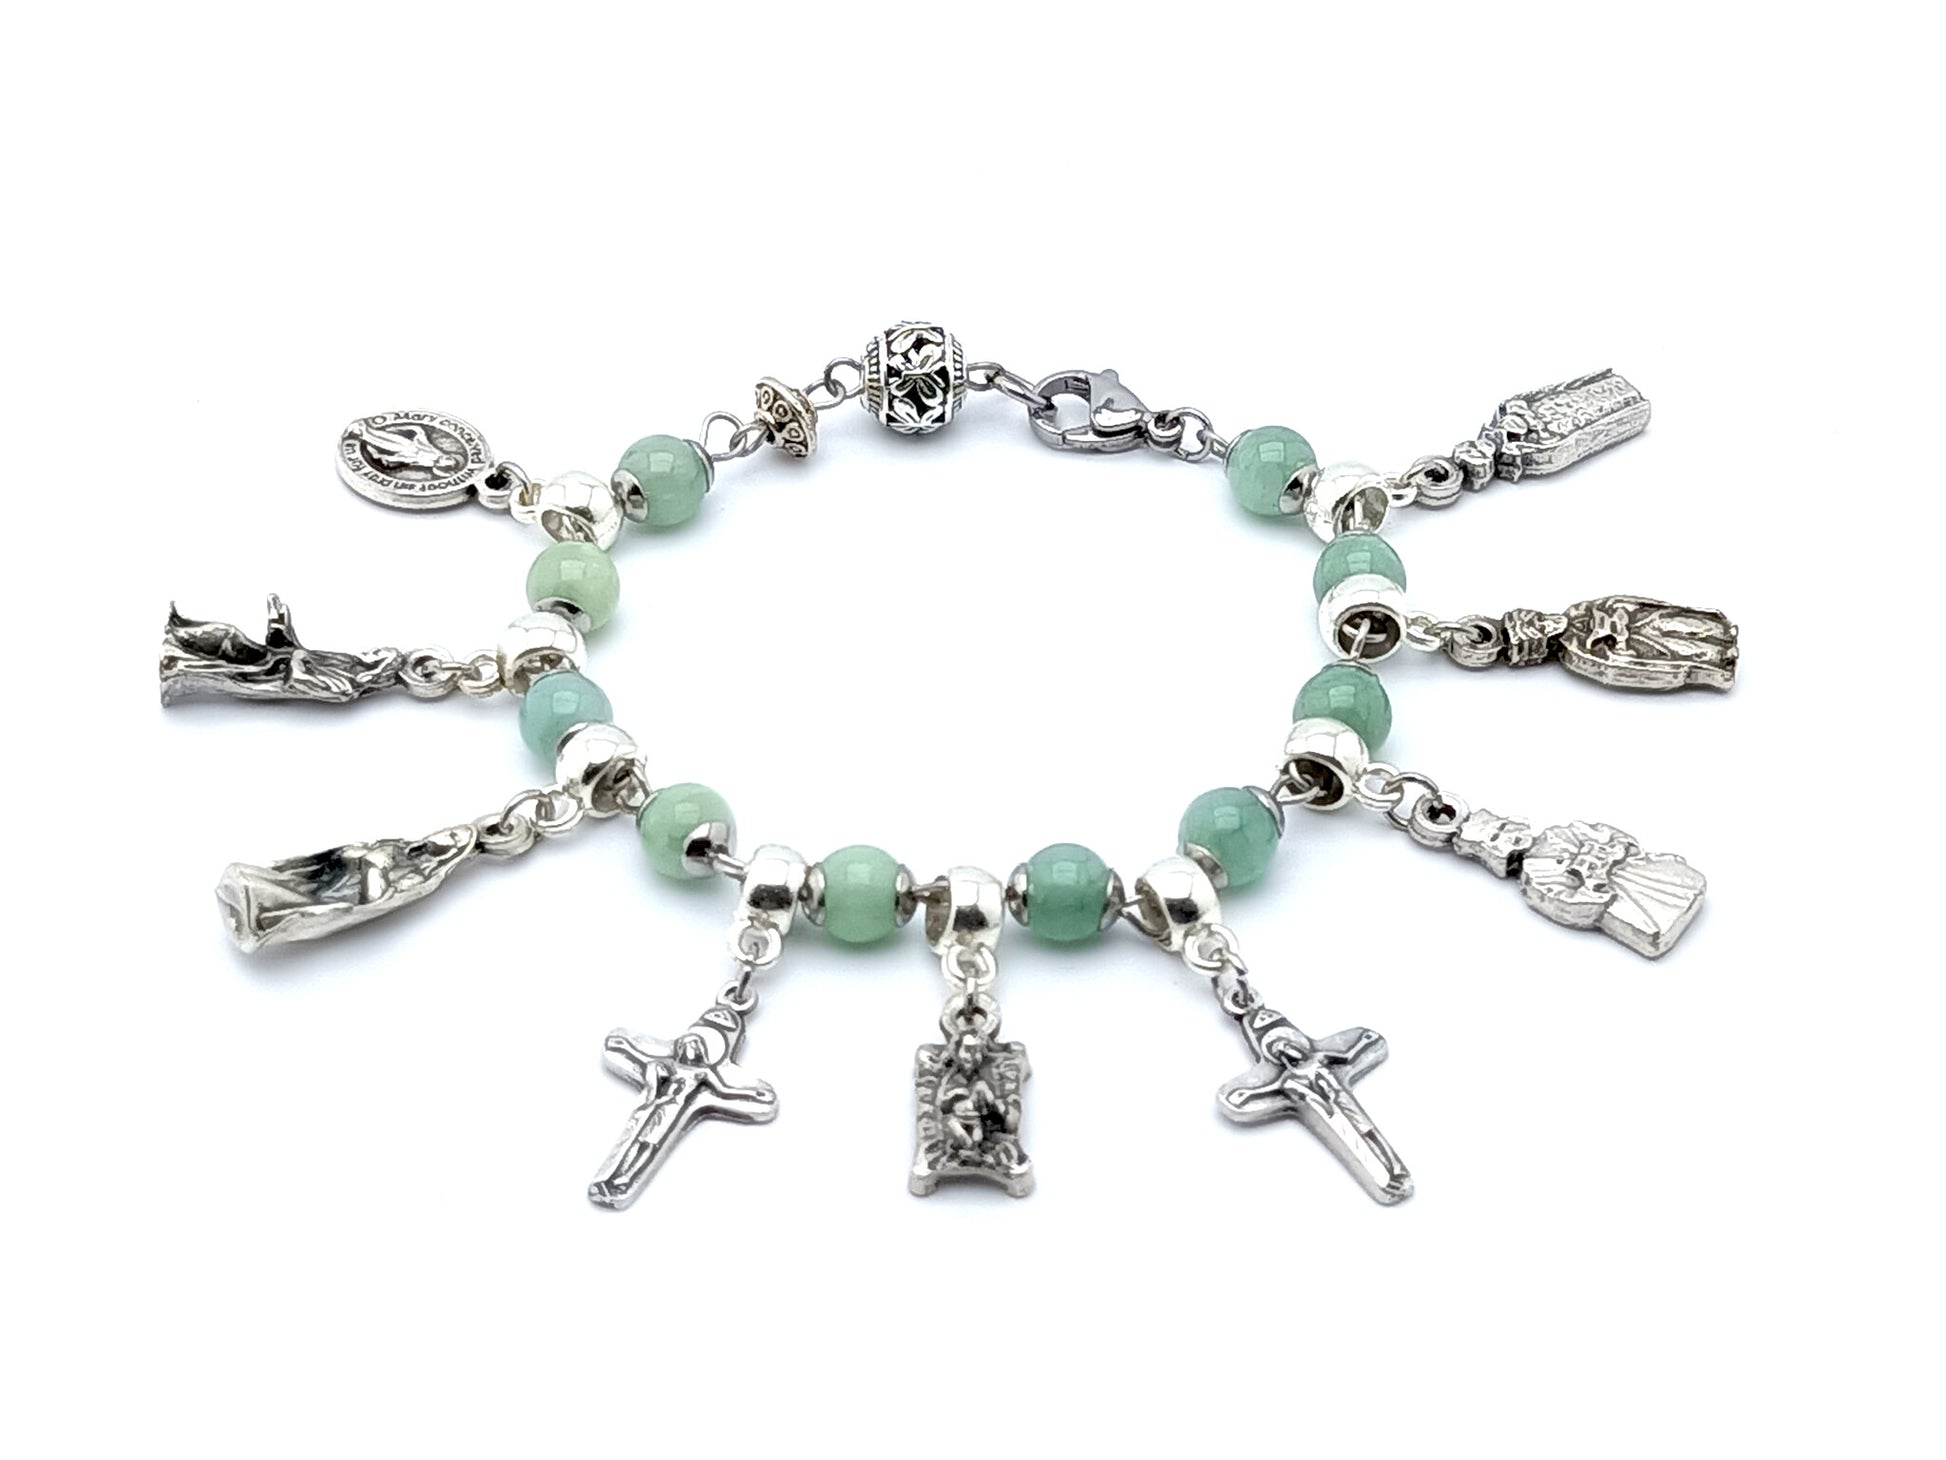 The Nativity unique rosary beads single decade bracelet with jade gemstone beads, three kings, Saint Joseph and the Virgin Mary pendant medals.